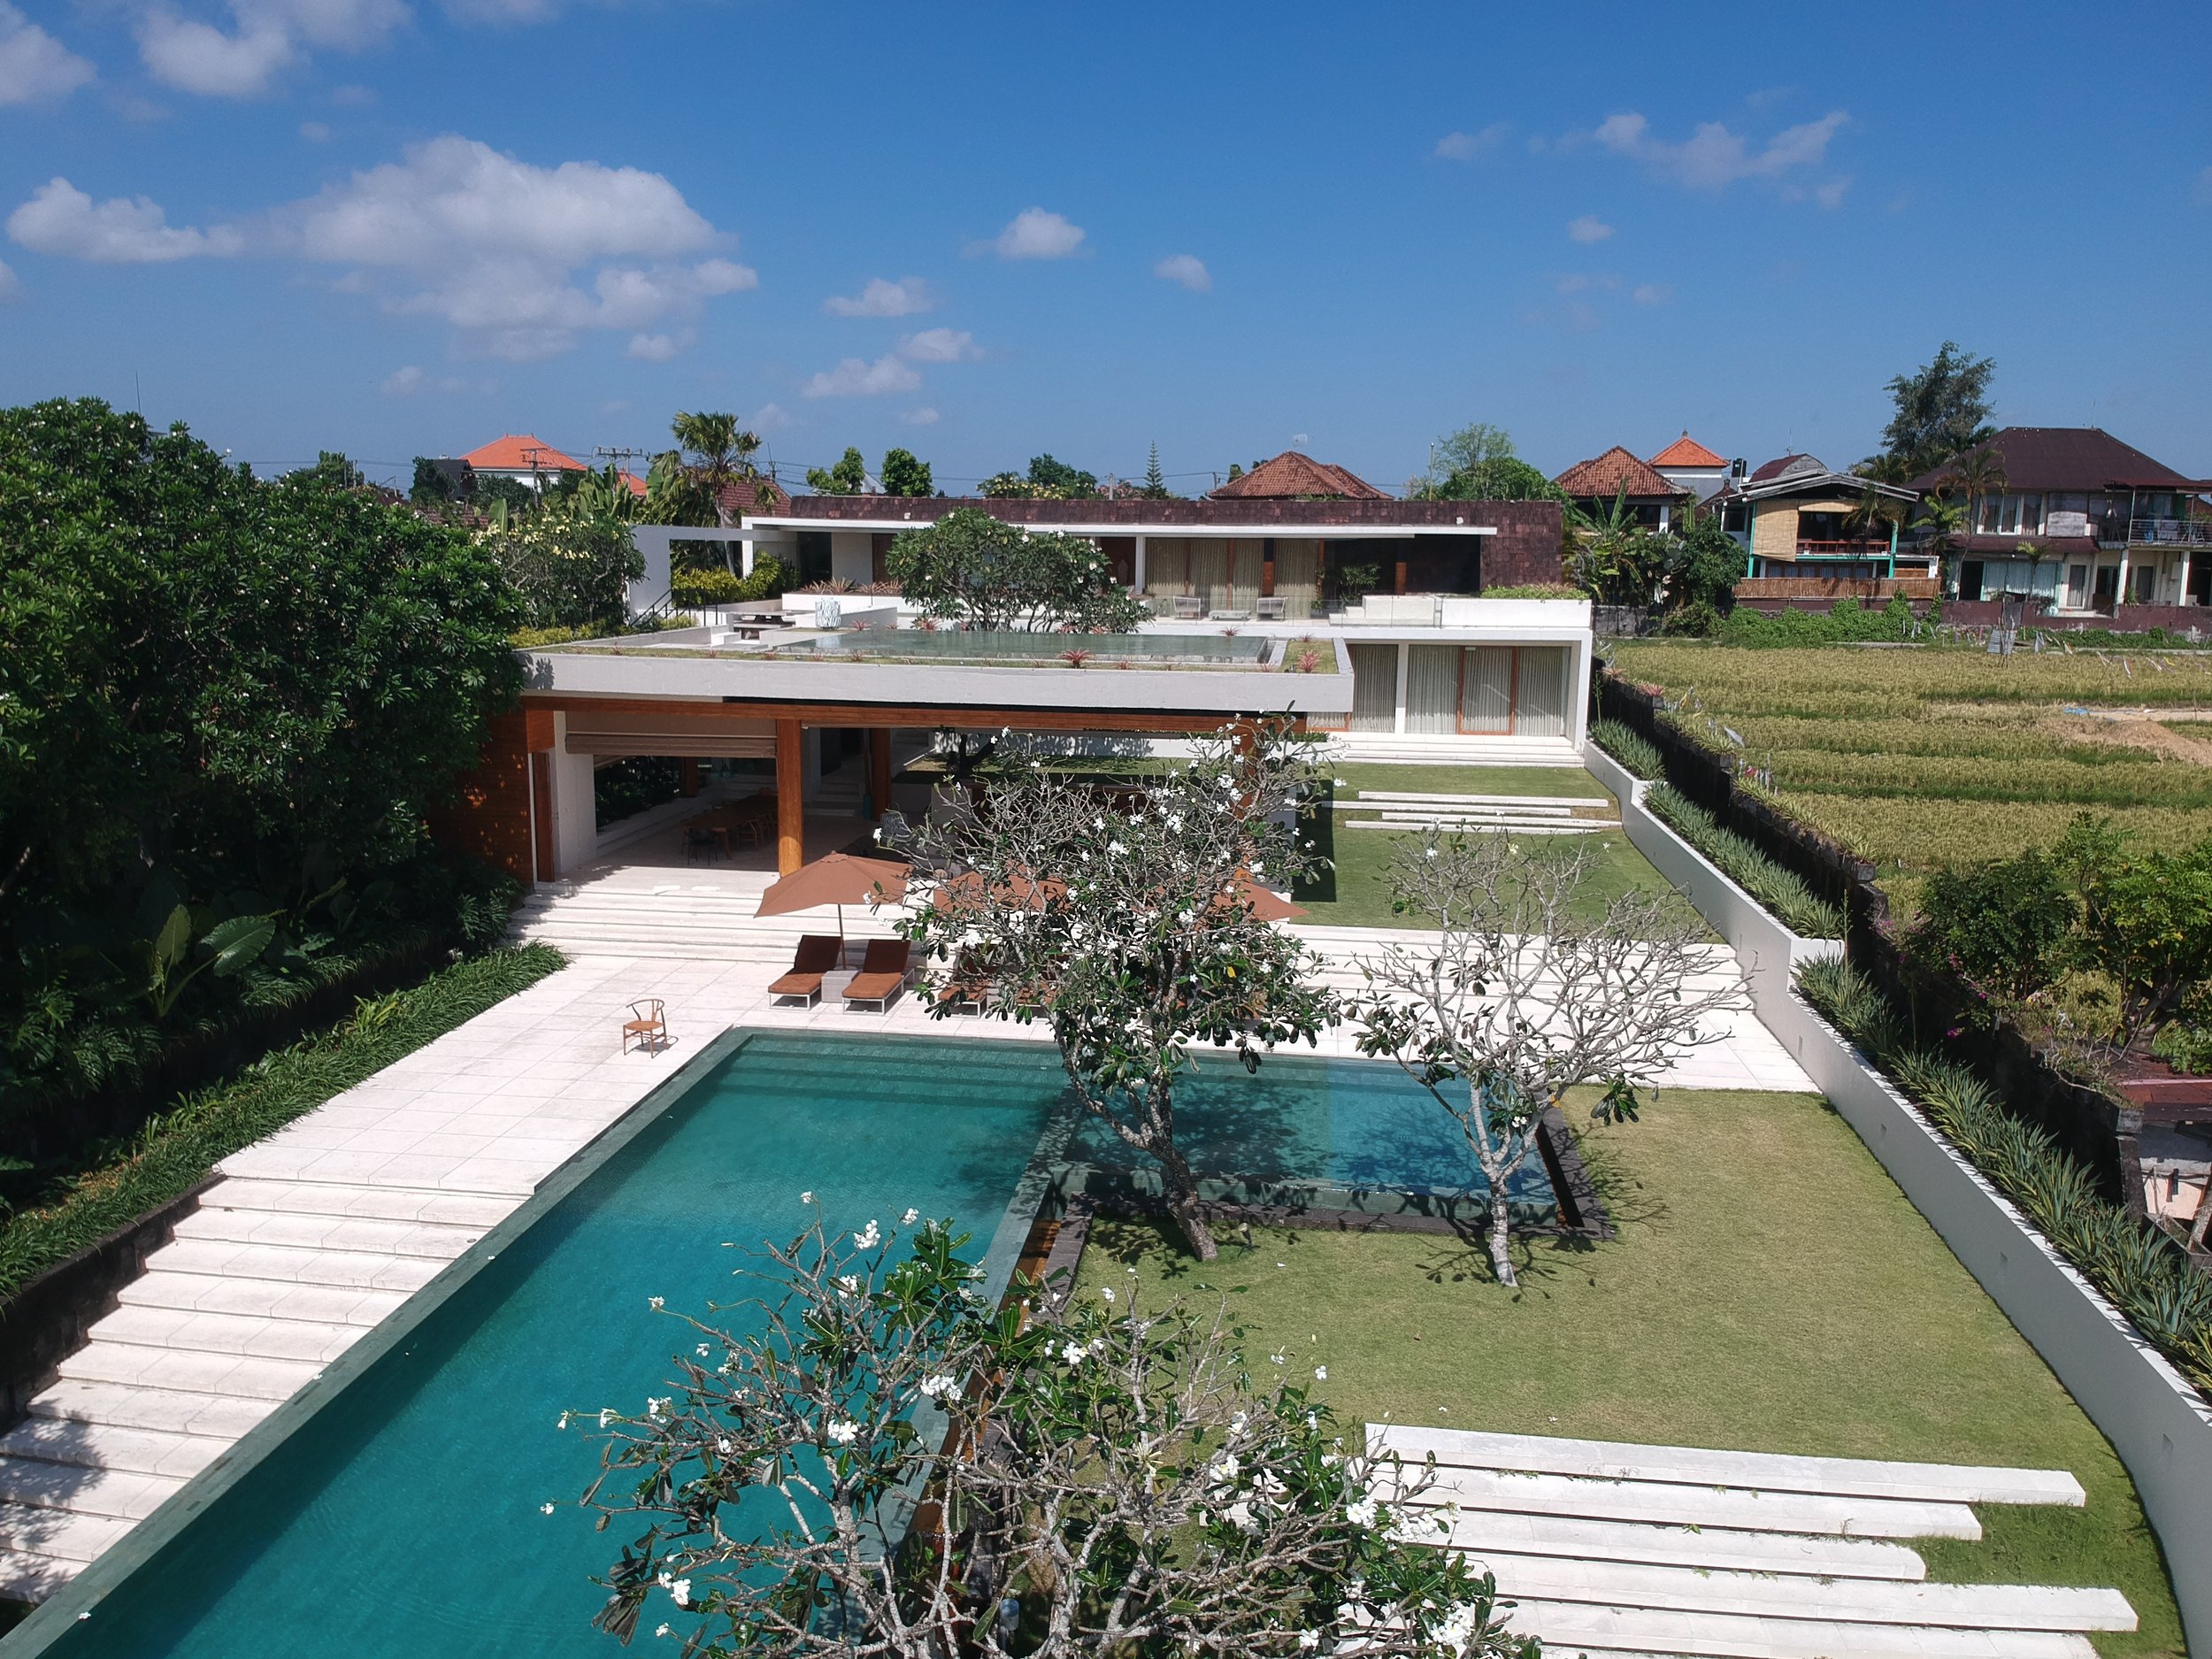 Overview of The Iman Villa, Image from A Tent in Bali